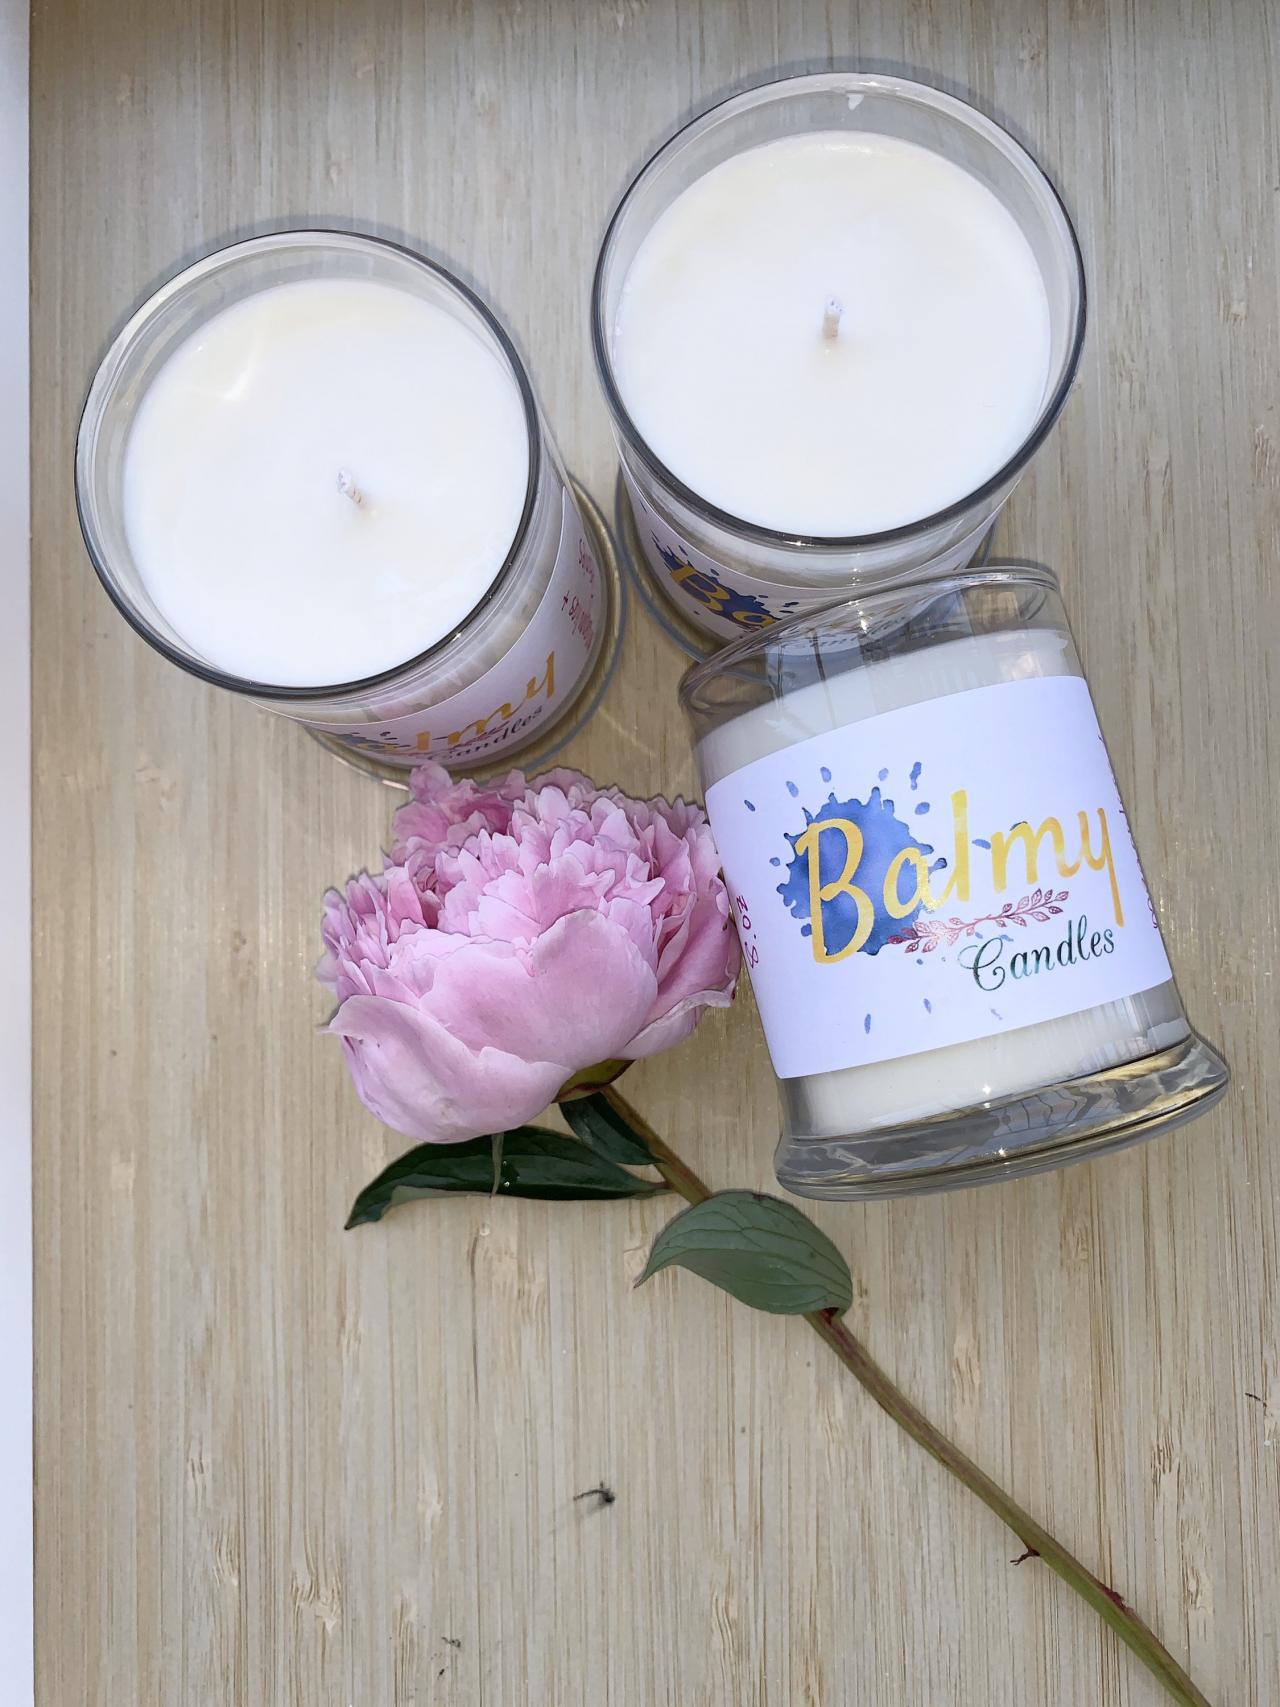 Magnolia + Peonies Hand-poured Soy Candle | Handcrafted Candle